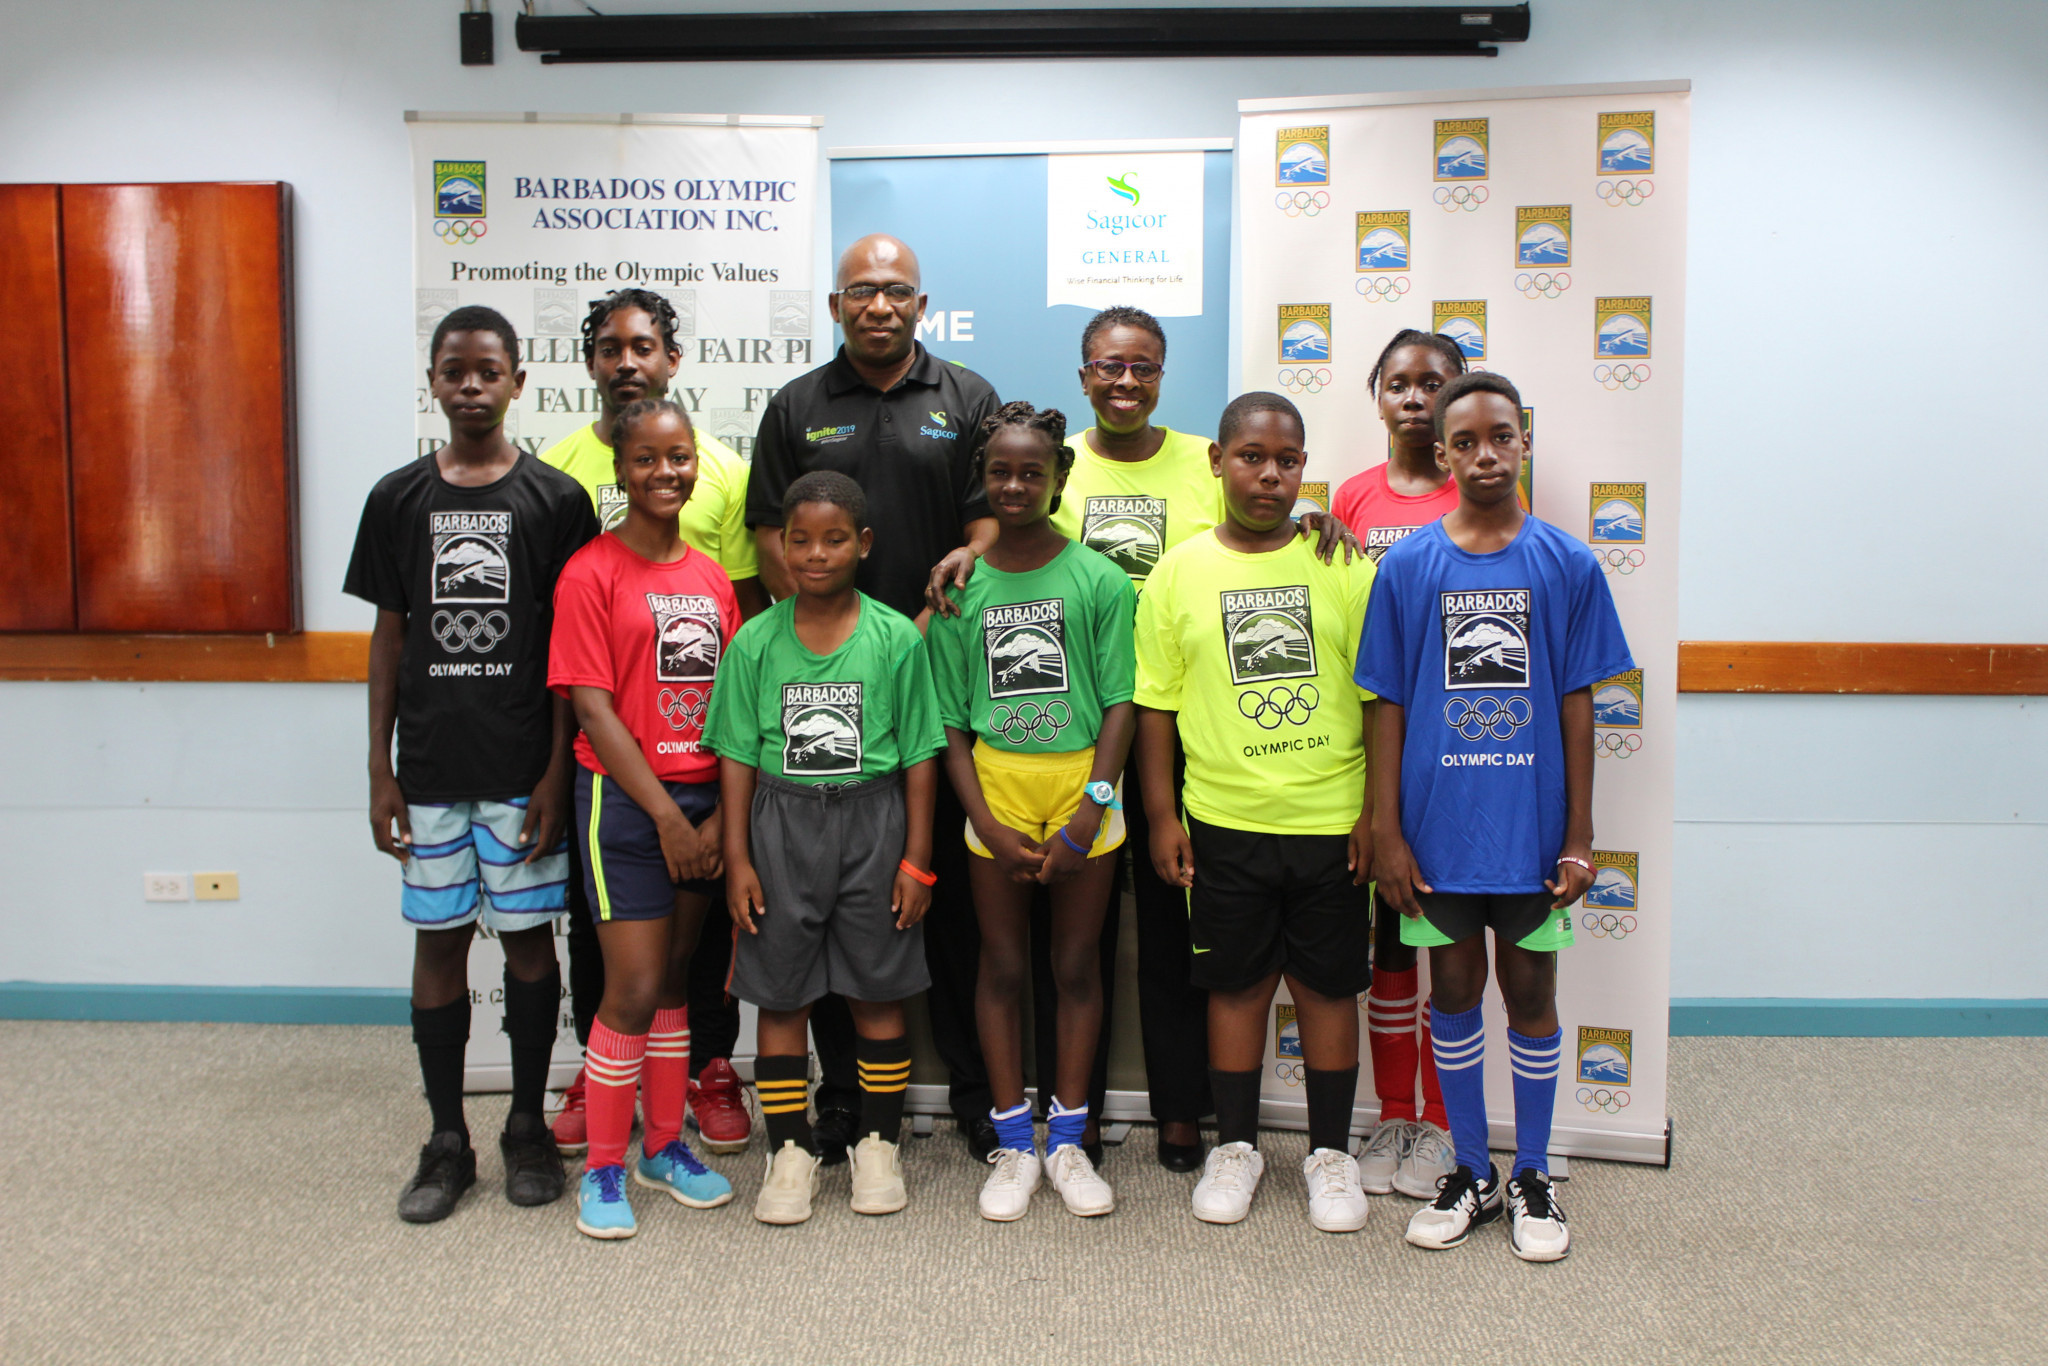 Barbados Olympic Association host Olympic Week events with Japanese theme ahead of Tokyo 2020